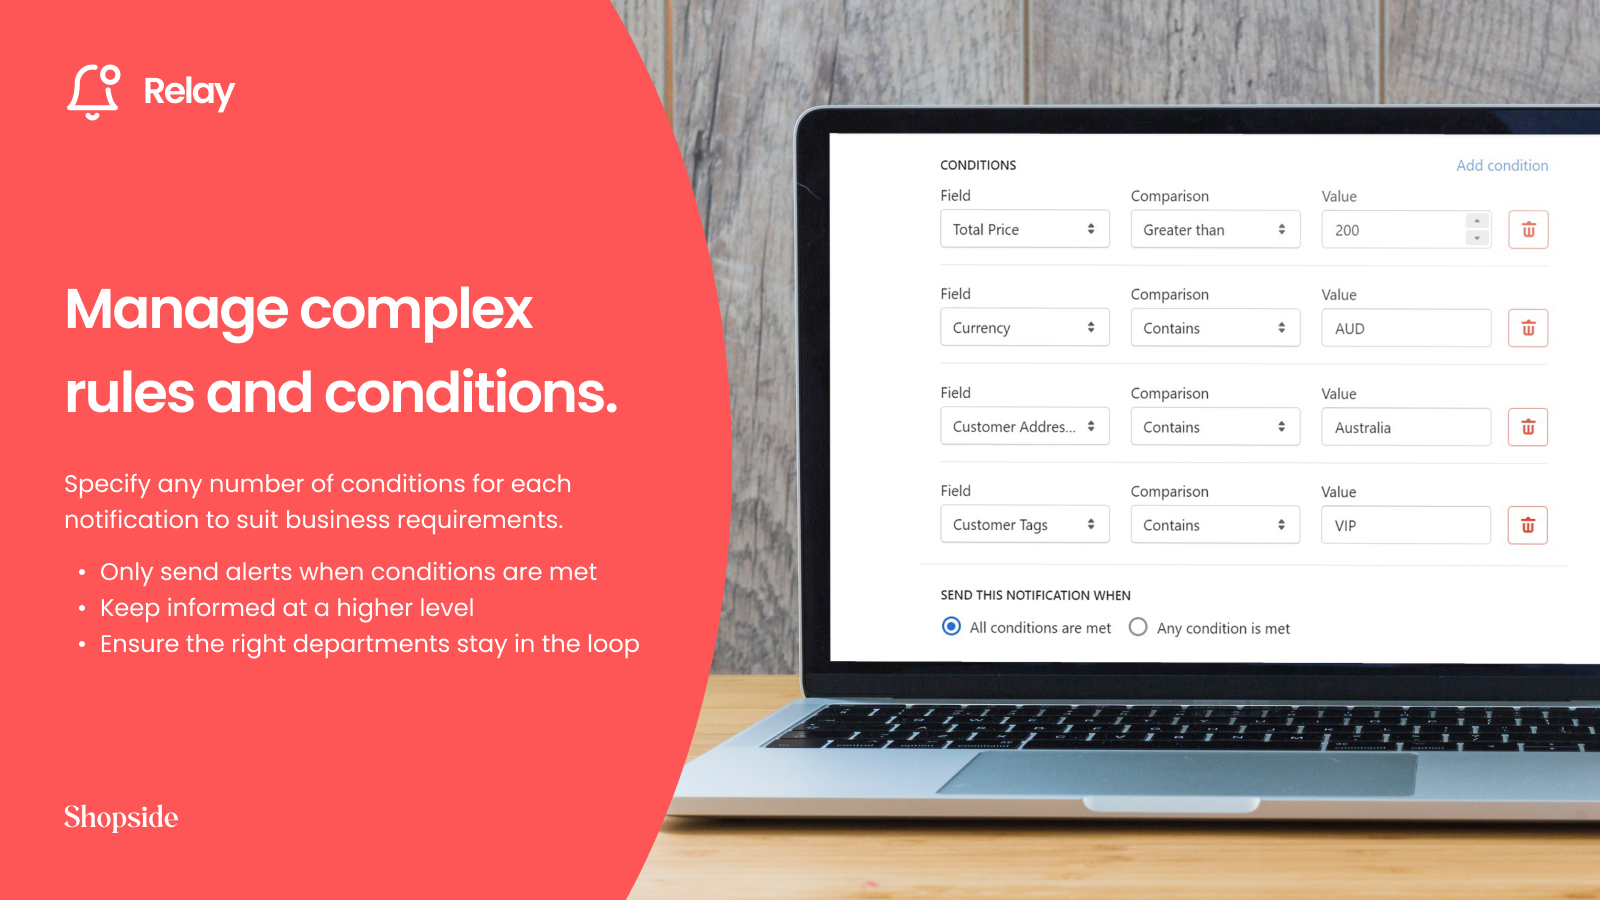 Manage complex rules and conditions.